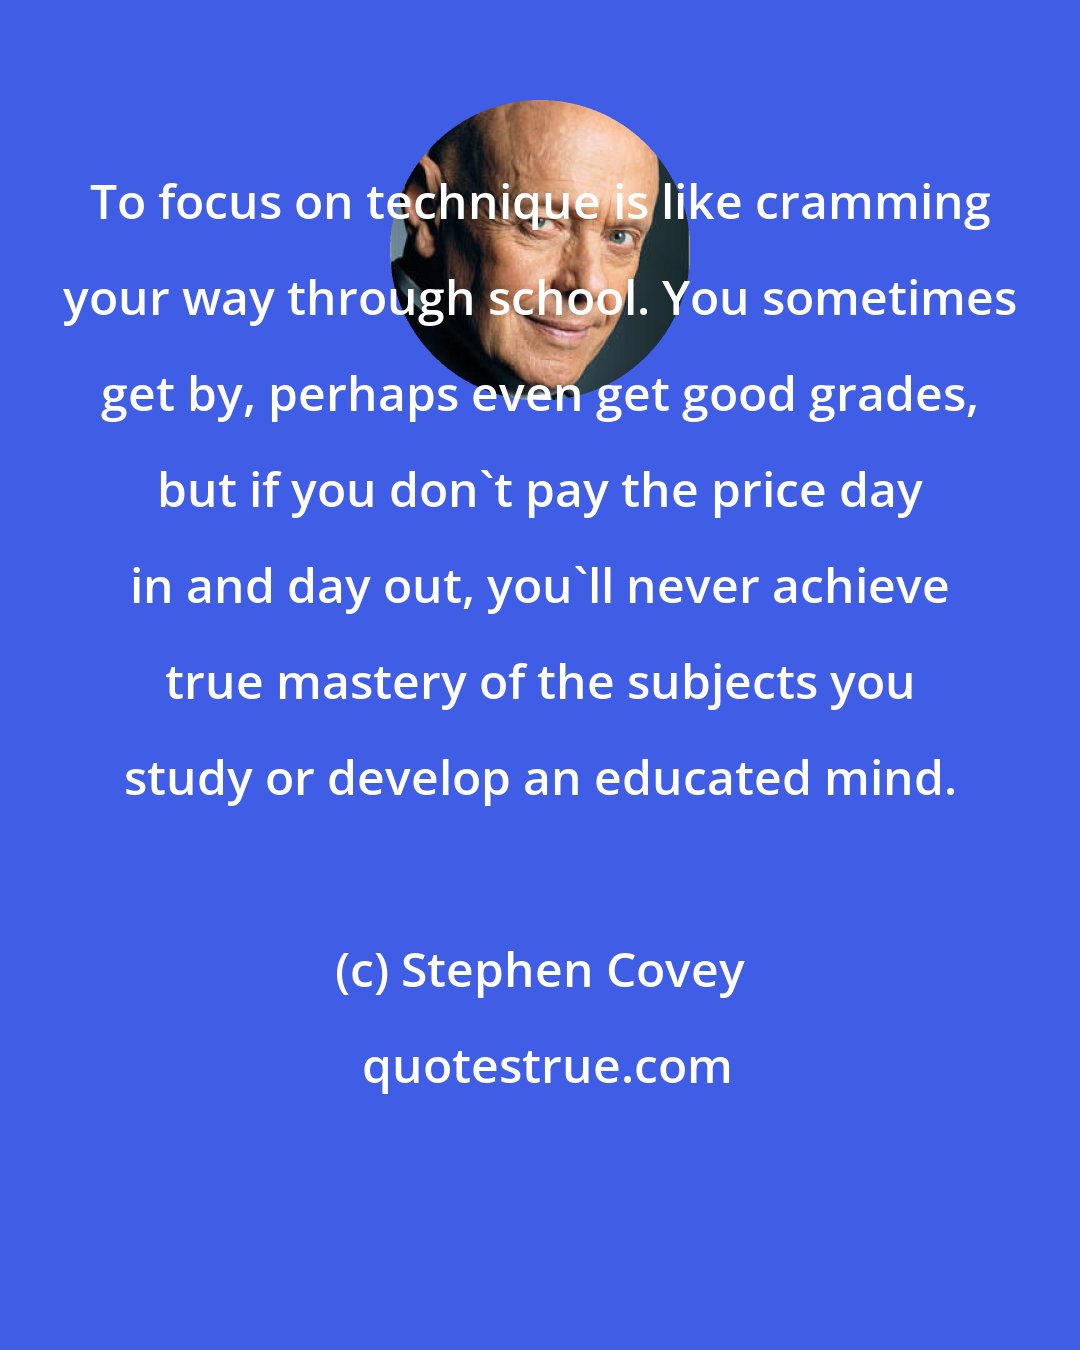 Stephen Covey: To focus on technique is like cramming your way through school. You sometimes get by, perhaps even get good grades, but if you don't pay the price day in and day out, you'll never achieve true mastery of the subjects you study or develop an educated mind.